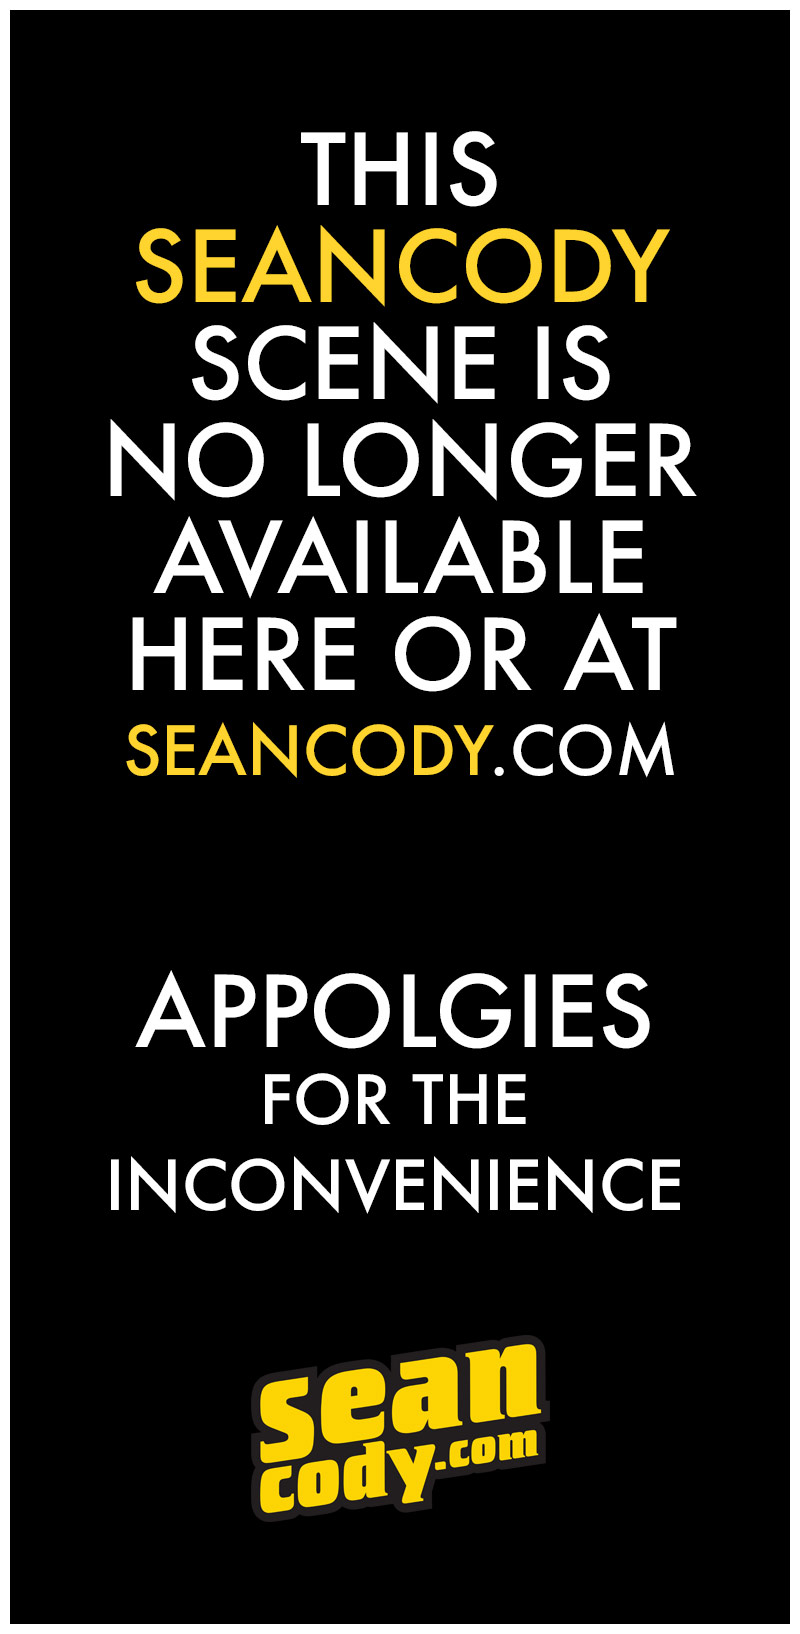 Reese (Introductory Solo) at SeanCody